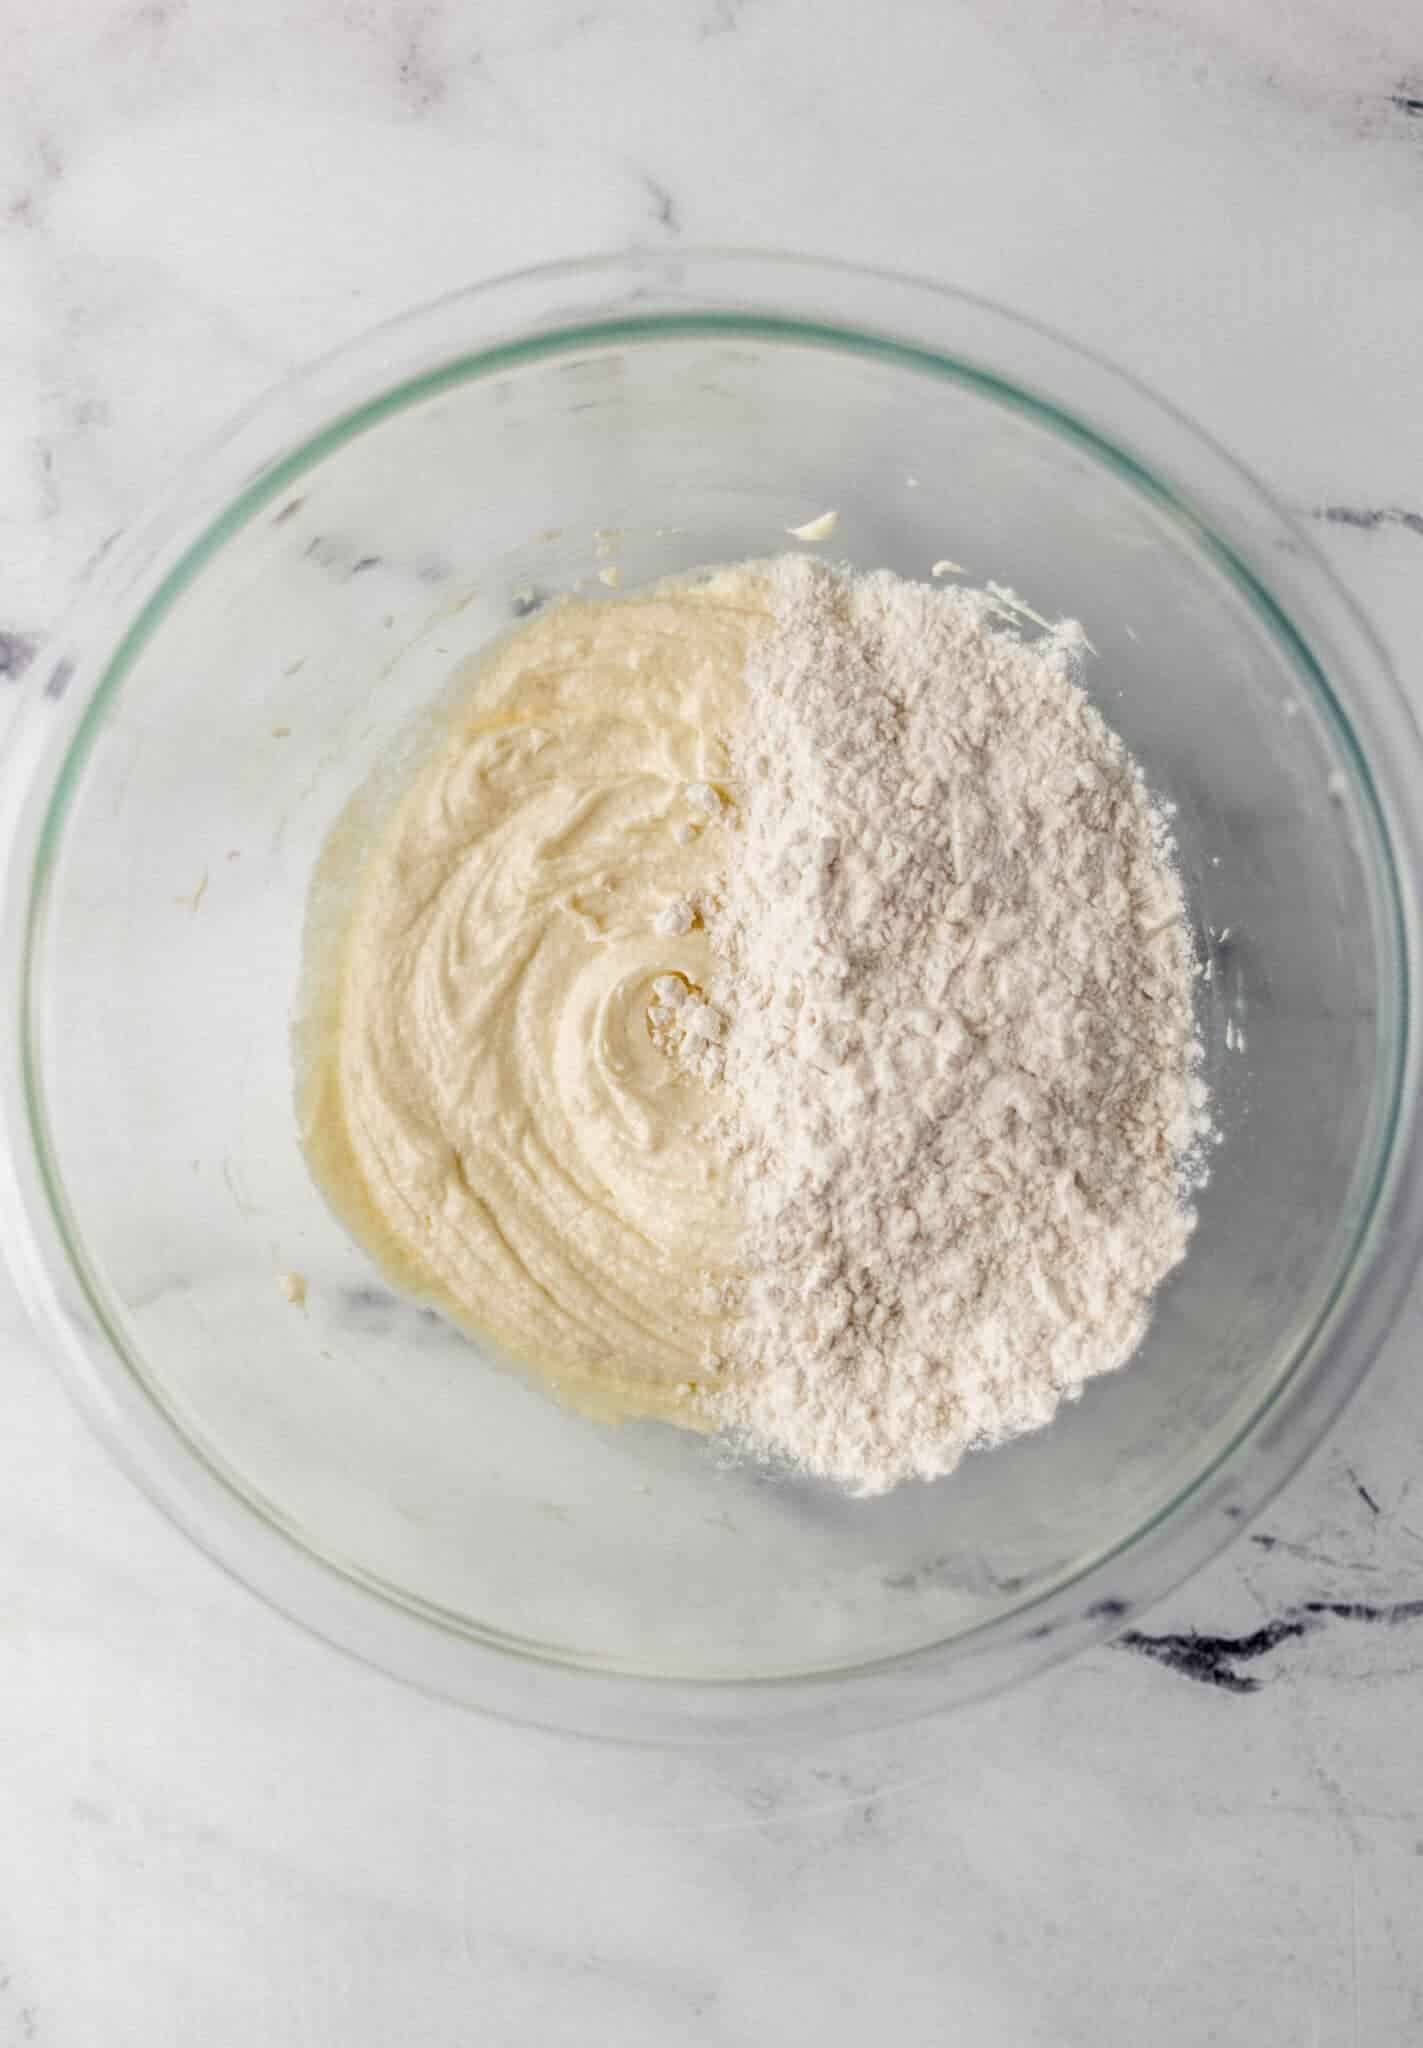 flour and baking powder added to ingredients in glass mixing bowl